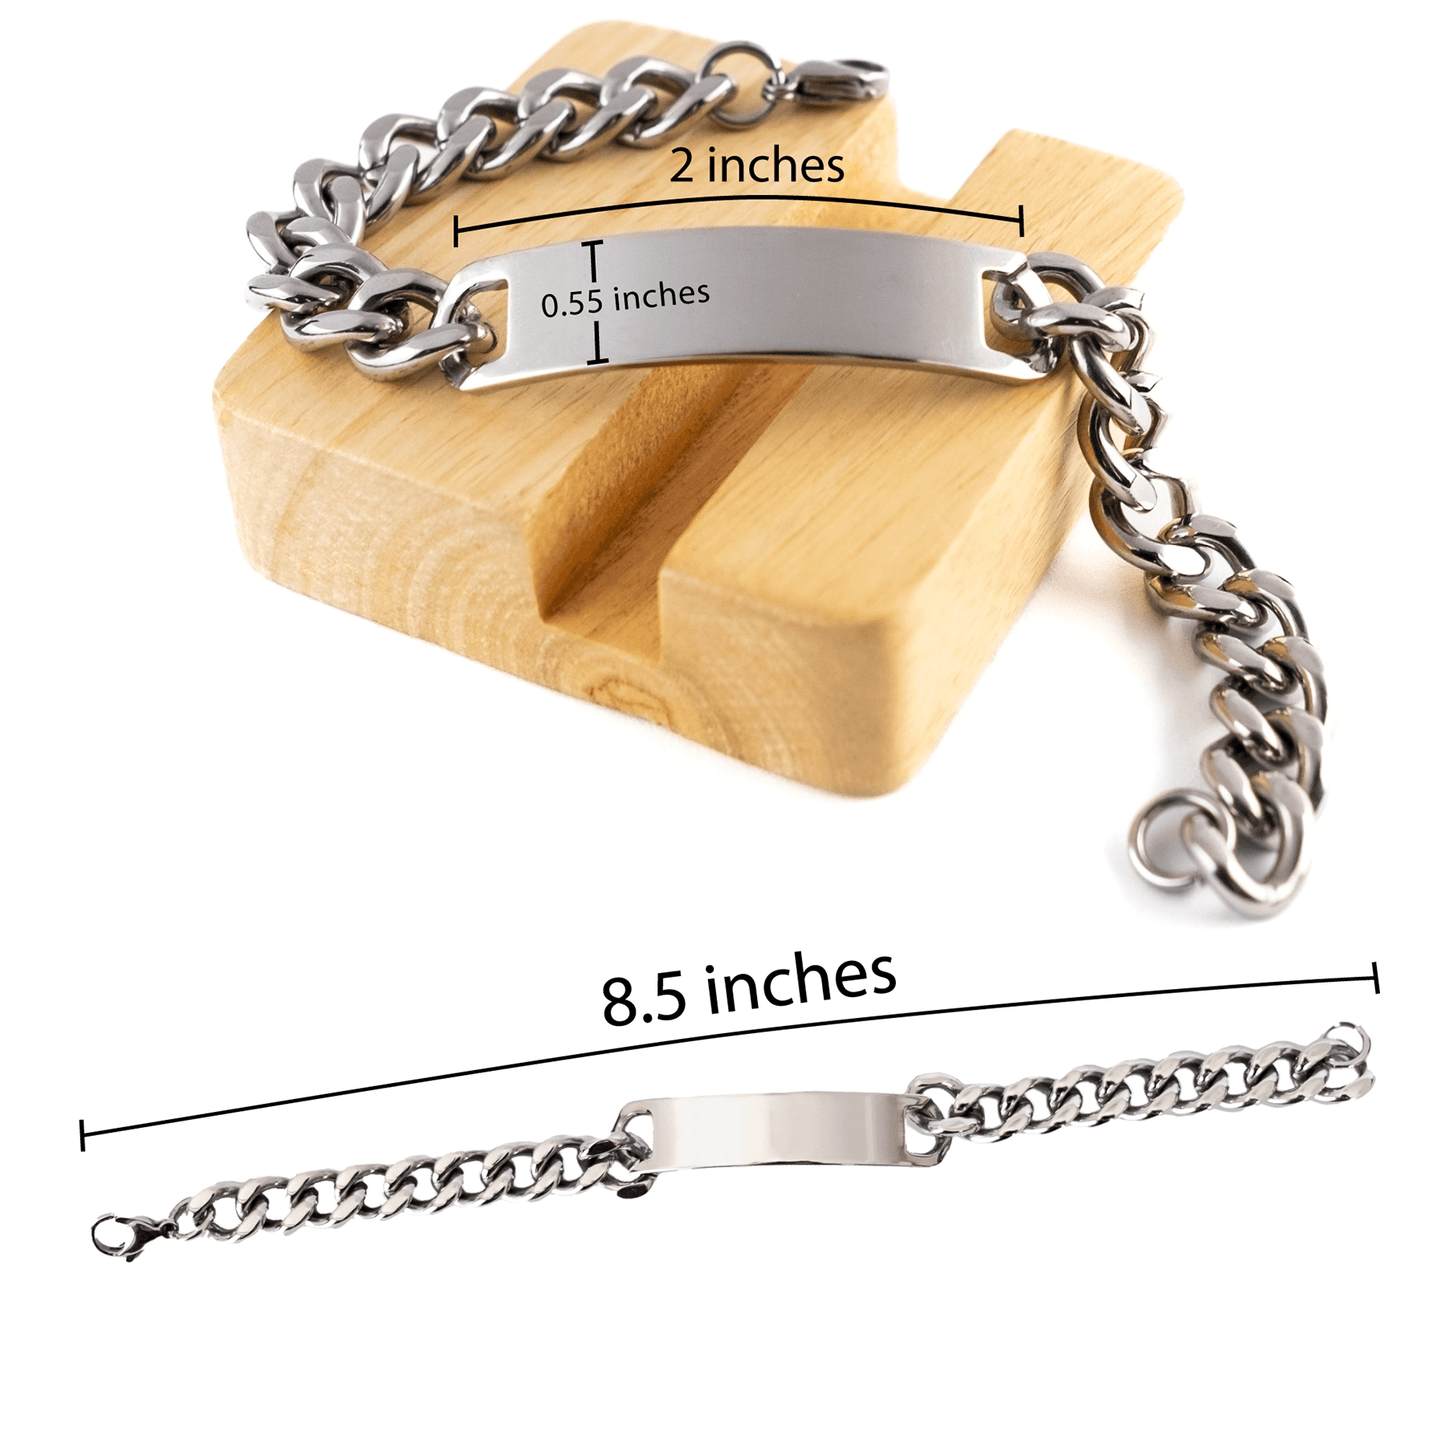 Word Processor Cuban Chain Link Engraved Bracelet - Thanks for being who you are - Birthday Christmas Jewelry Gifts Coworkers Colleague Boss - Mallard Moon Gift Shop